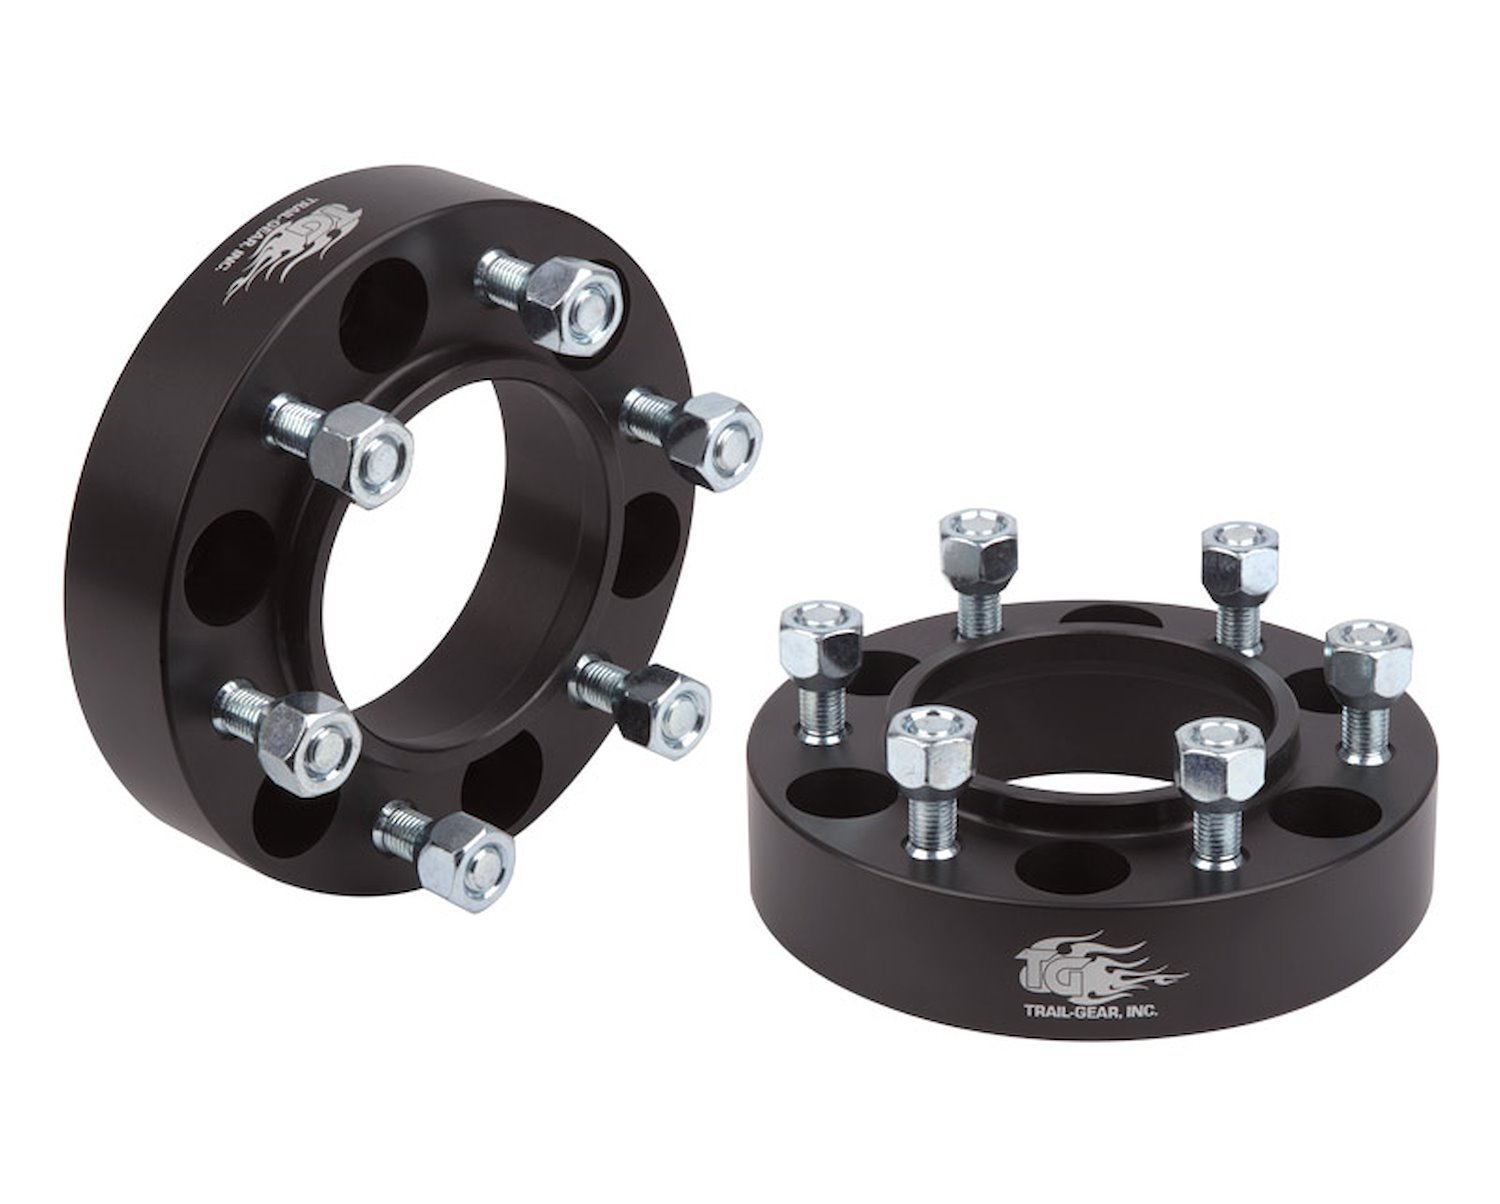 Hub-Centric Wheel Spacer Kit 1.5" Thickness